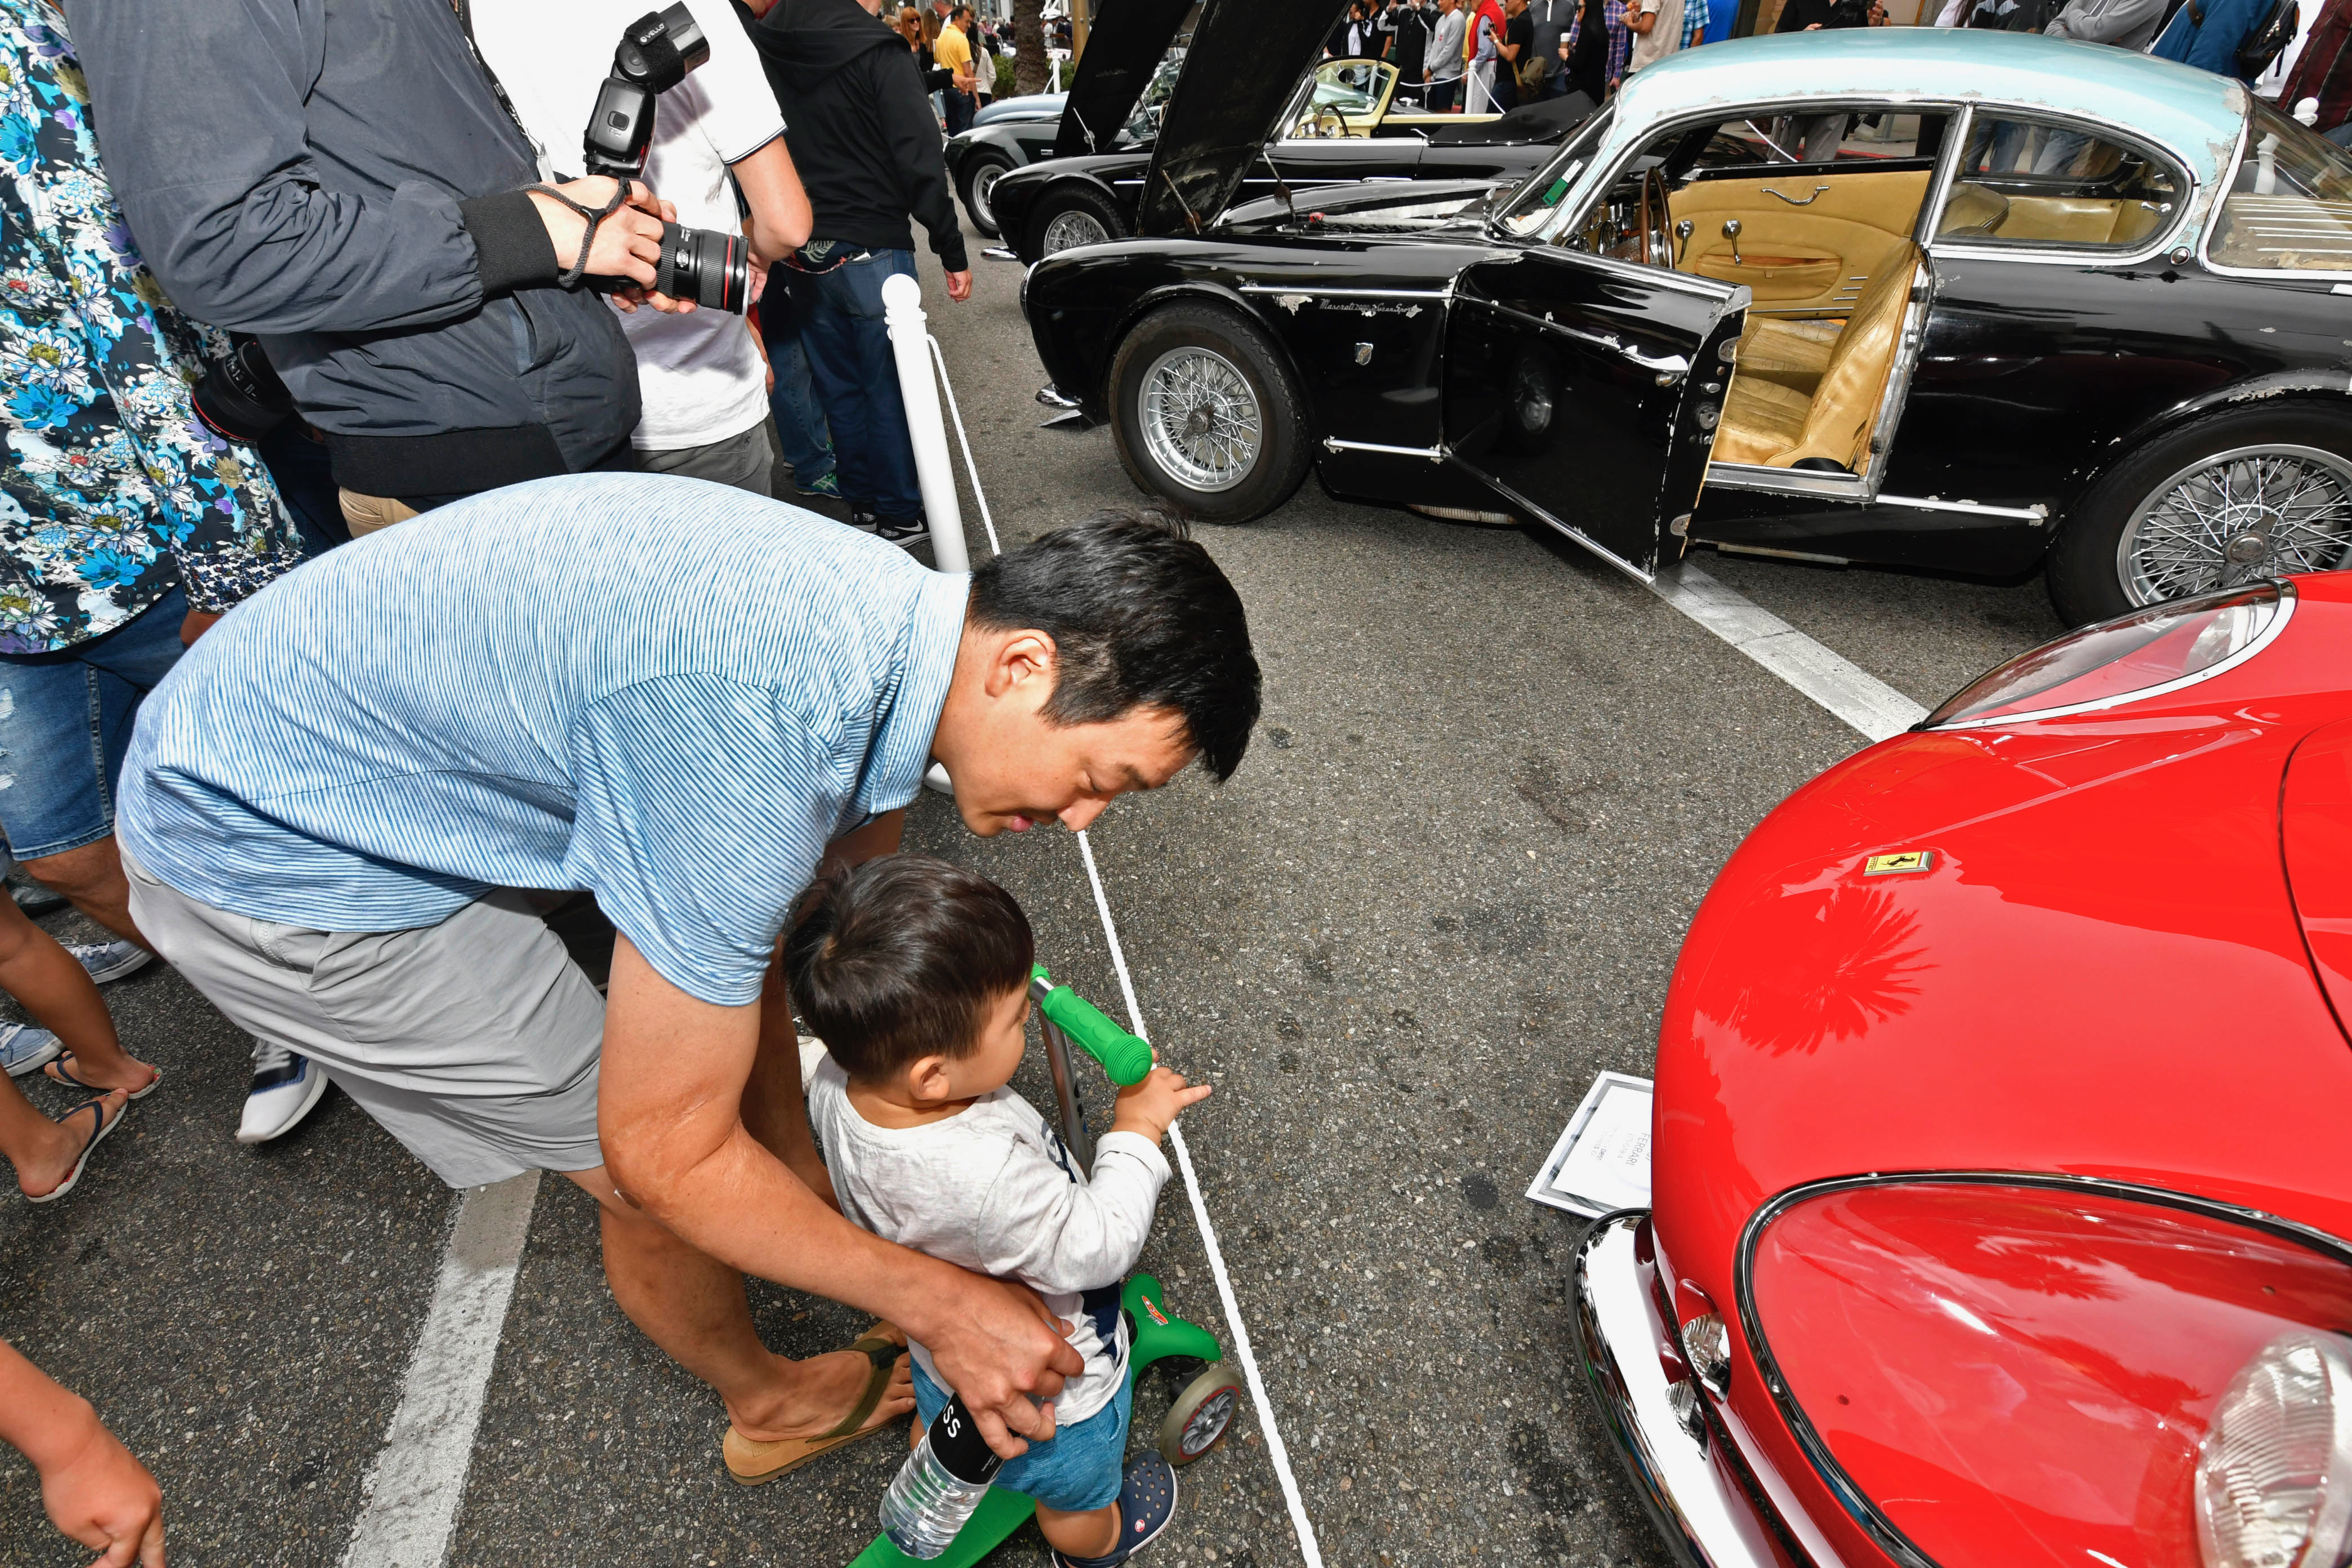 Rodeo Drive, Best bargain on Rodeo Drive: The concours on Father’s Day, ClassicCars.com Journal